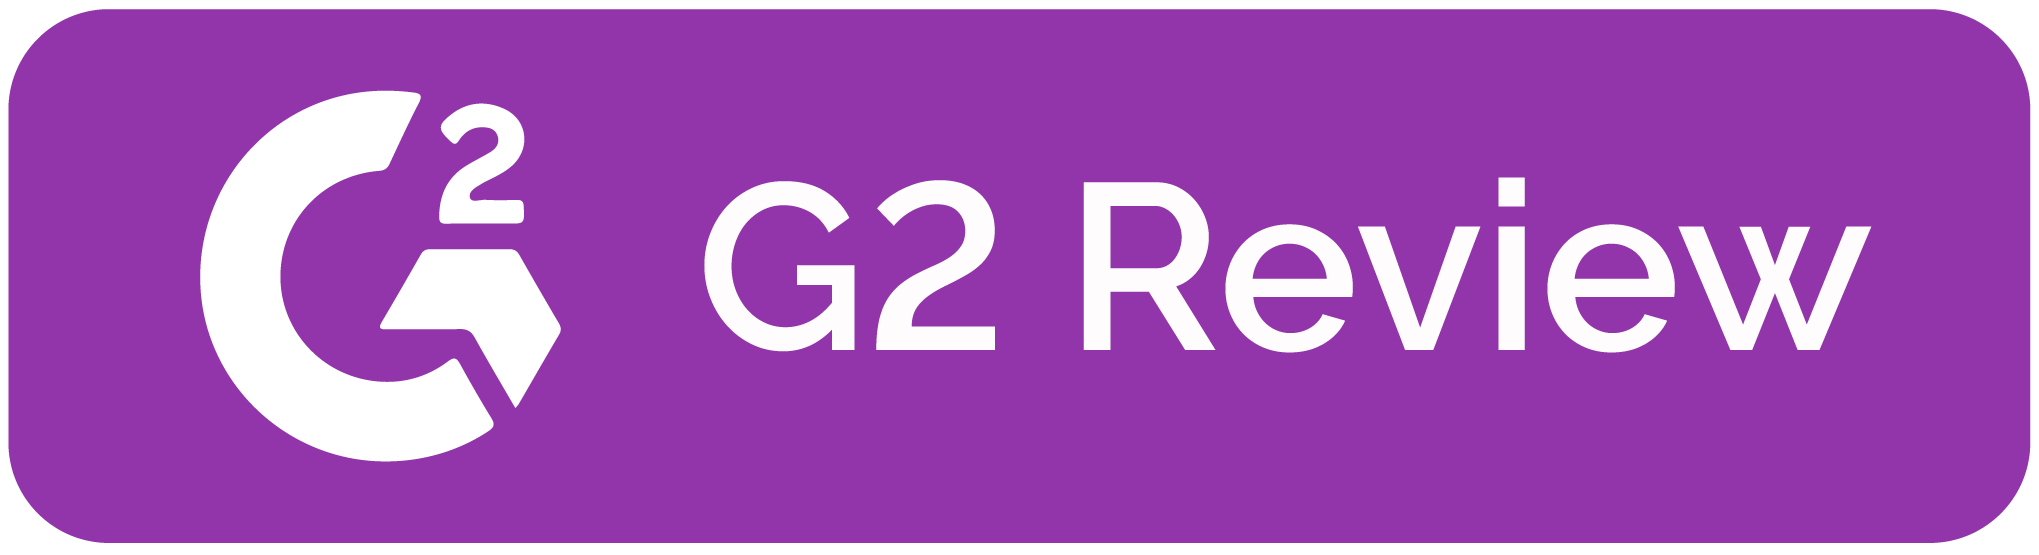 G2 Review Button